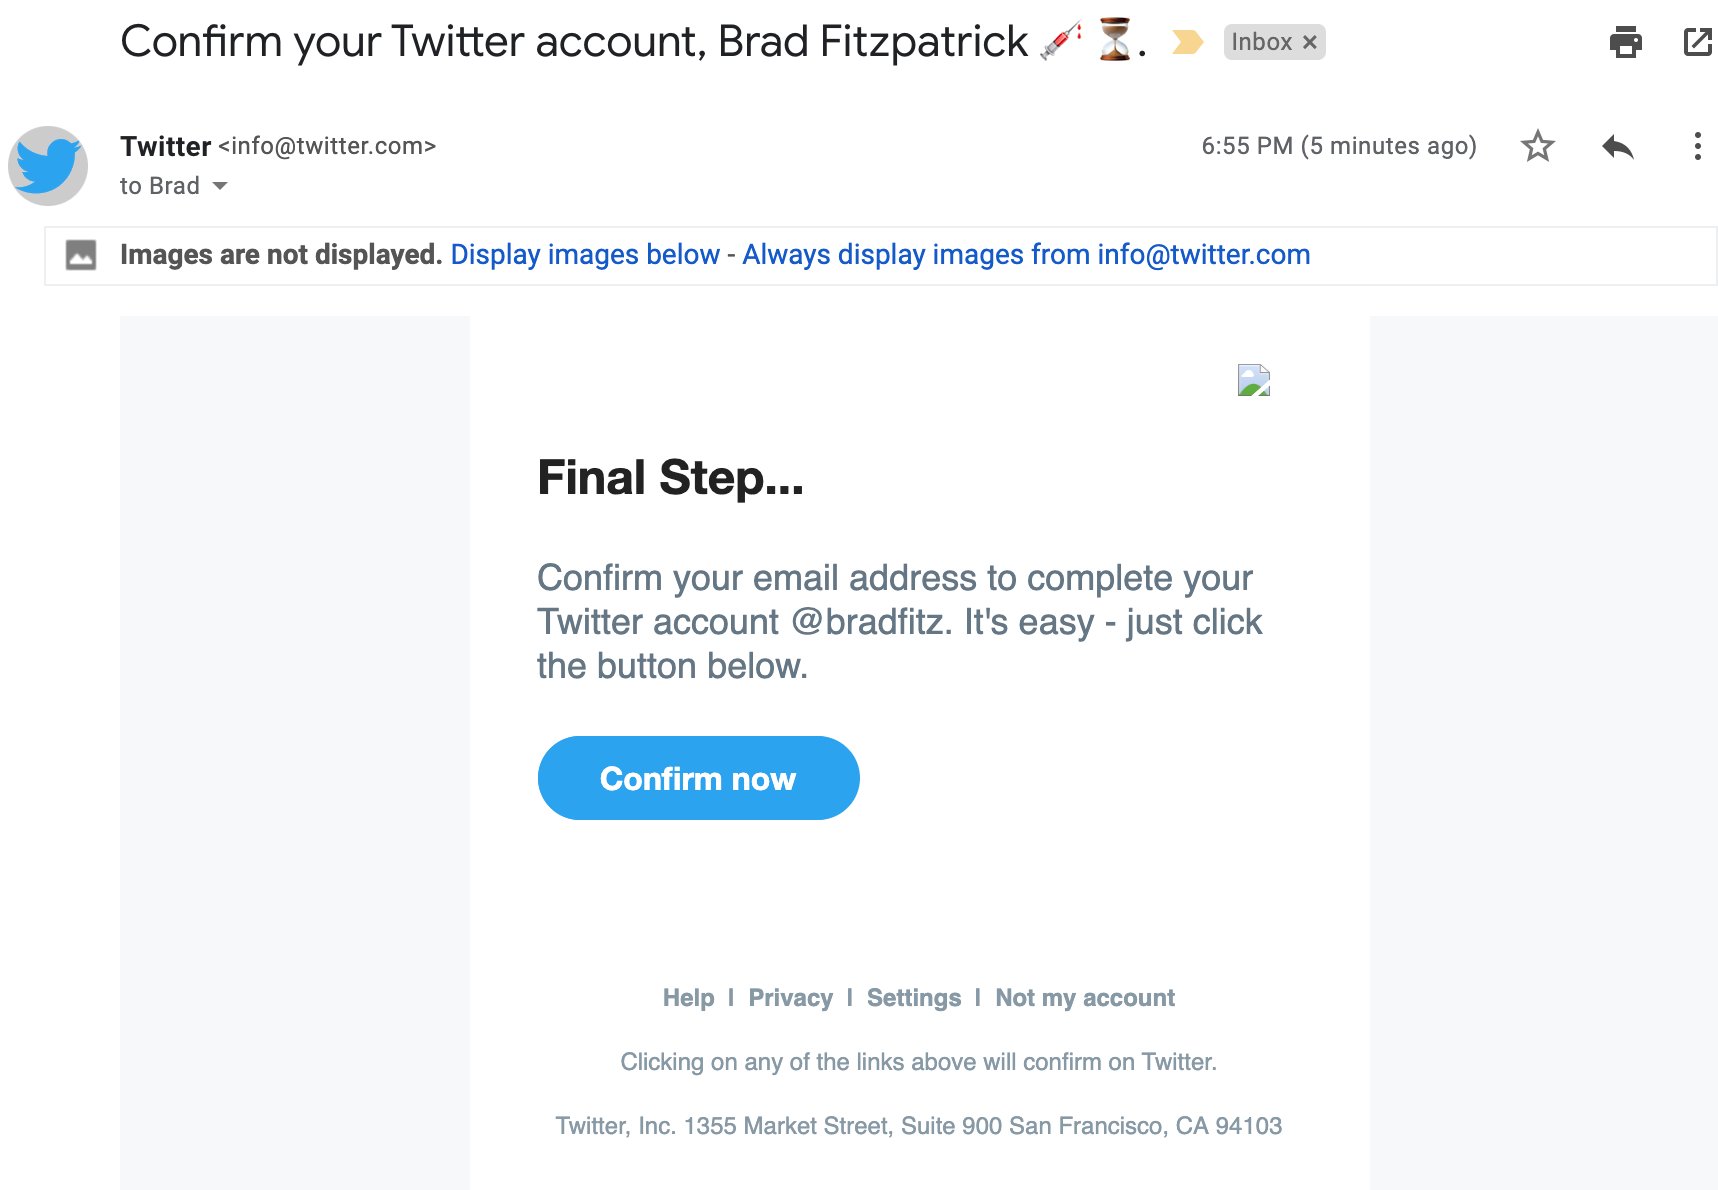 Brad Fitzpatrick Uh Random Twitter Email Asking To Confirm My Email Address After 14 Years With The Same Email I Assumed Phishing But Email Looks Mostly Legit T Co Tdotwadwkr